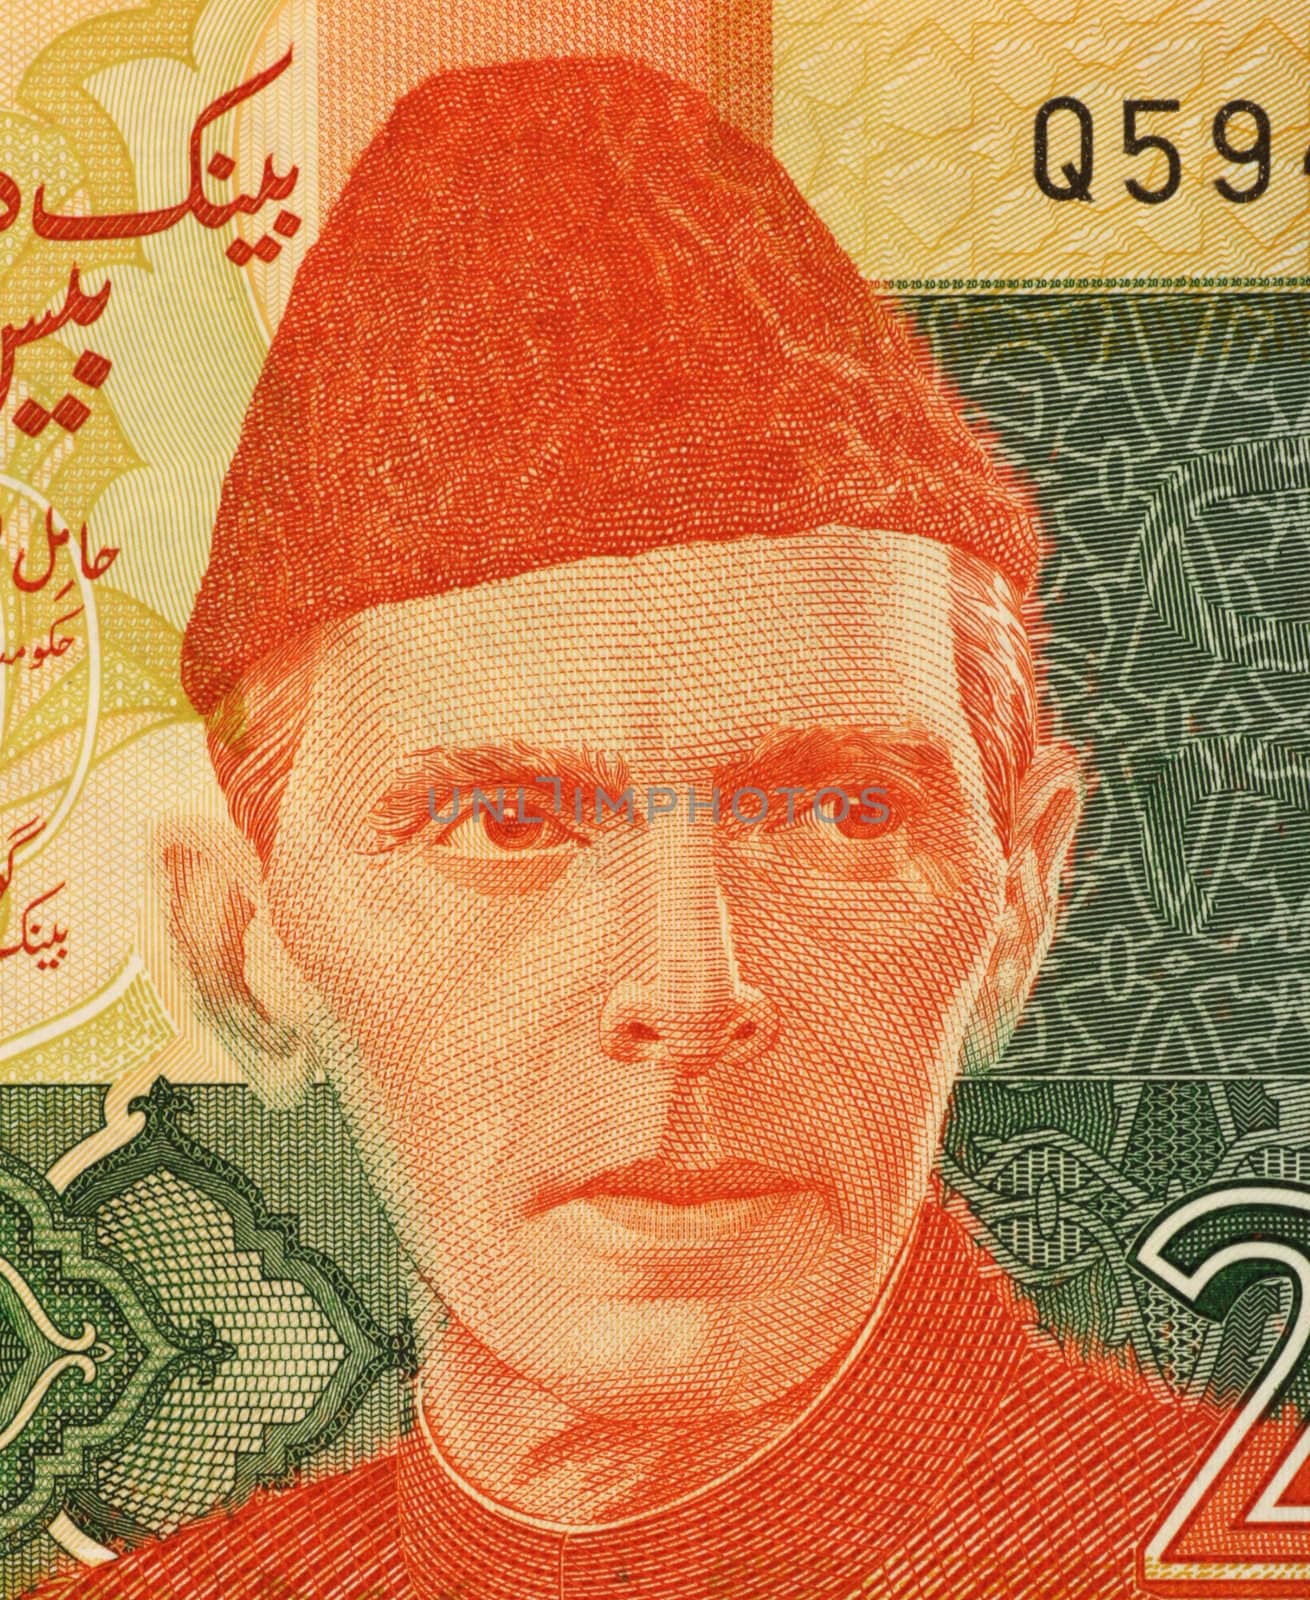 Mohammed Ali Jinnah (1876-1948) on 20 Rupees 2007 Banknote from Pakistan. Lawyer, politician, statesman  and founder of Pakistan.